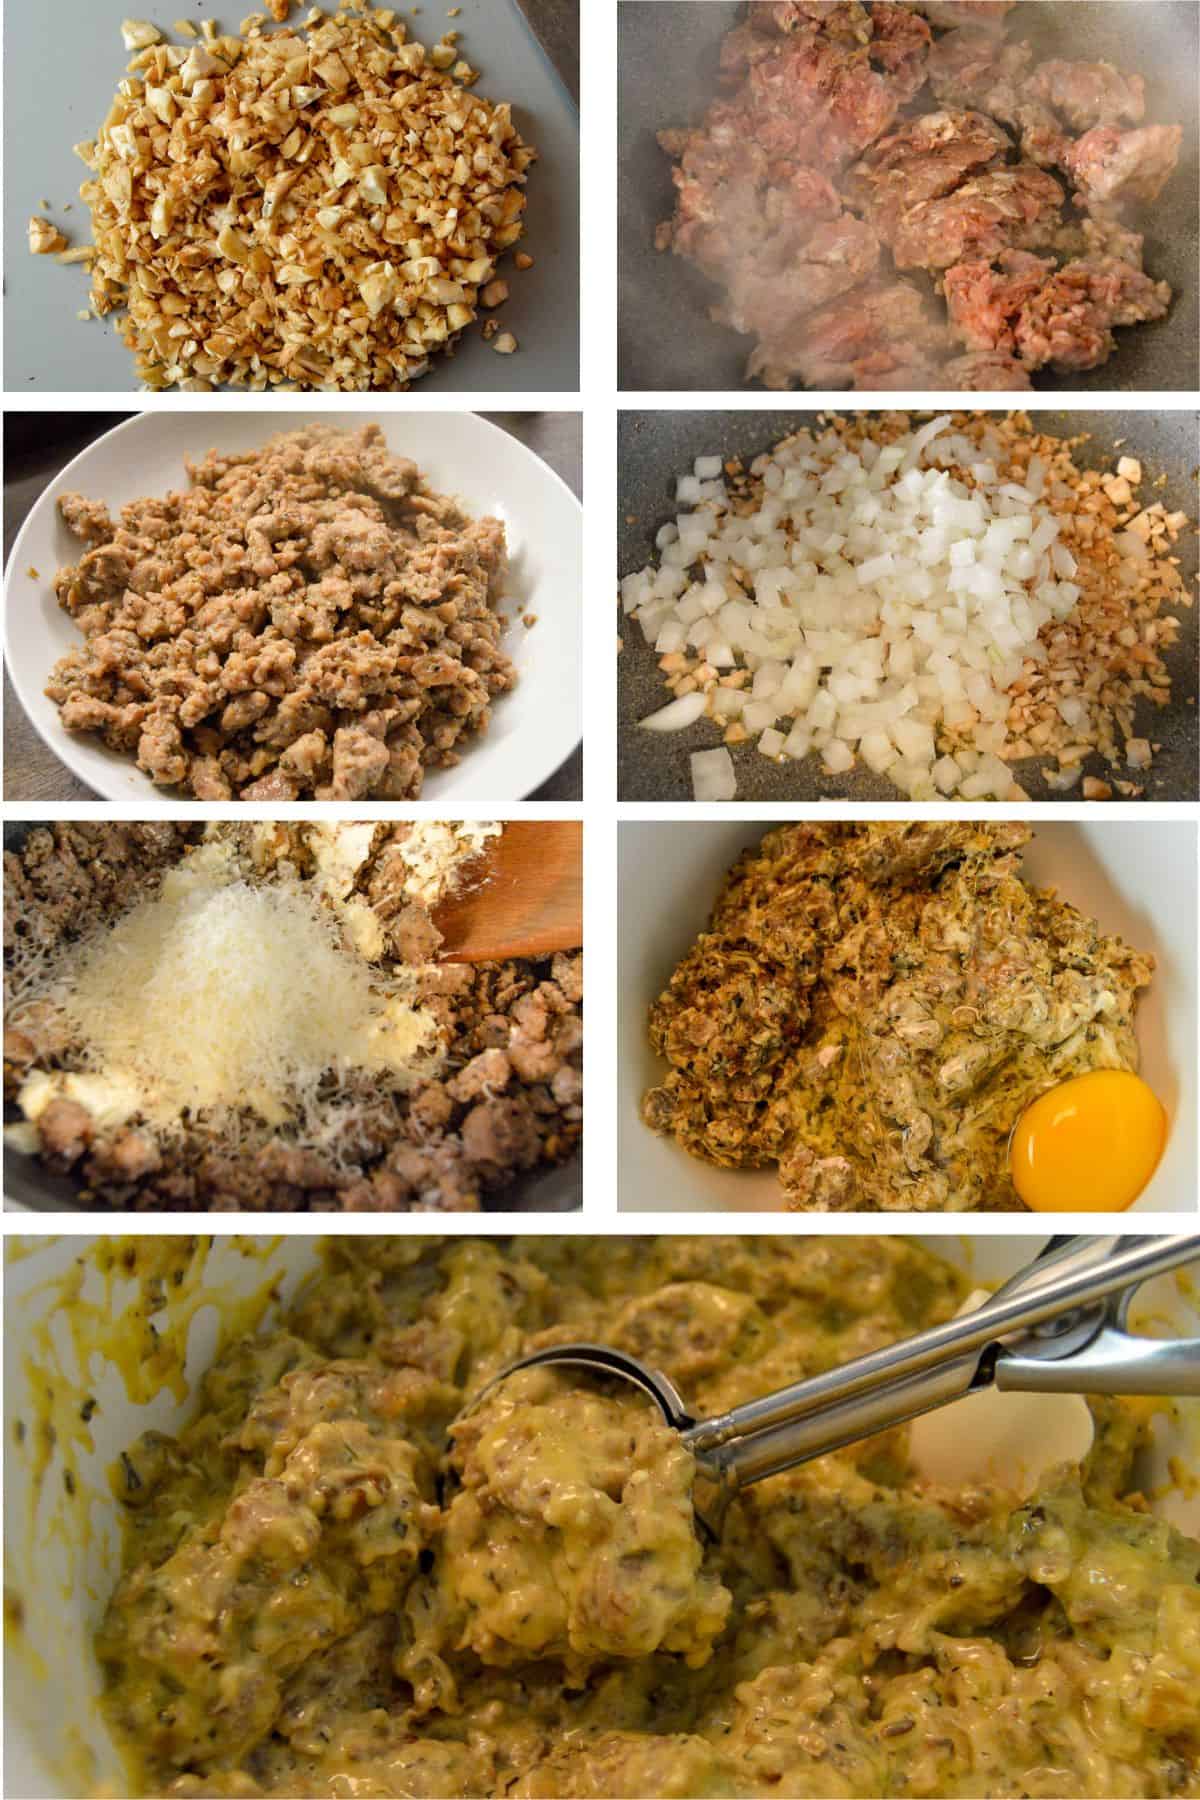 7 images for making sausage stuffing for mushrooms